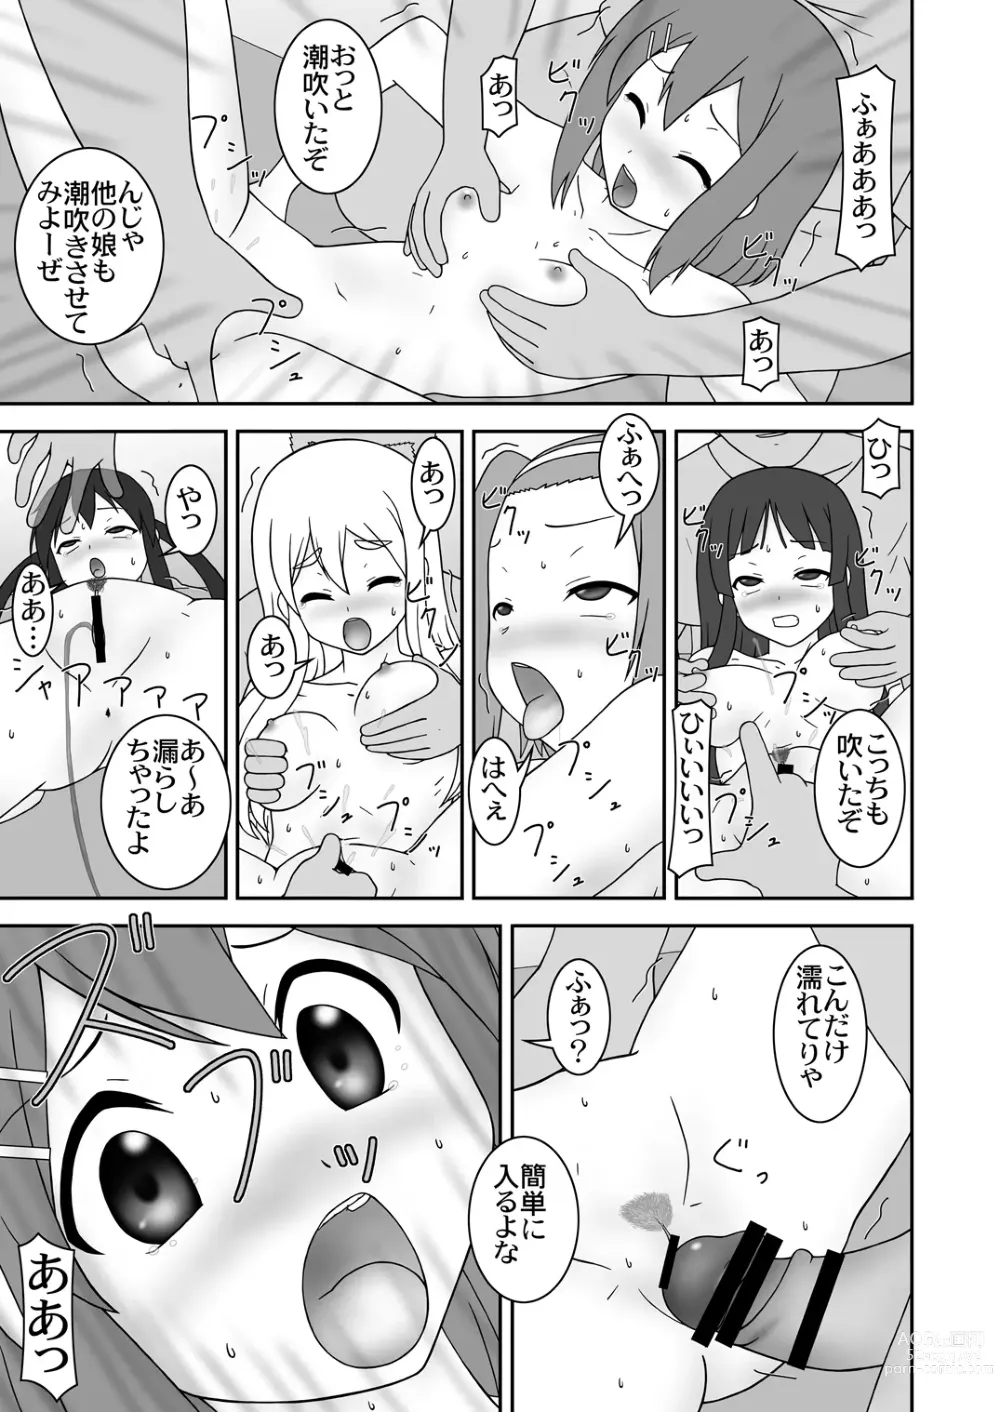 Page 8 of doujinshi OPEN AIR